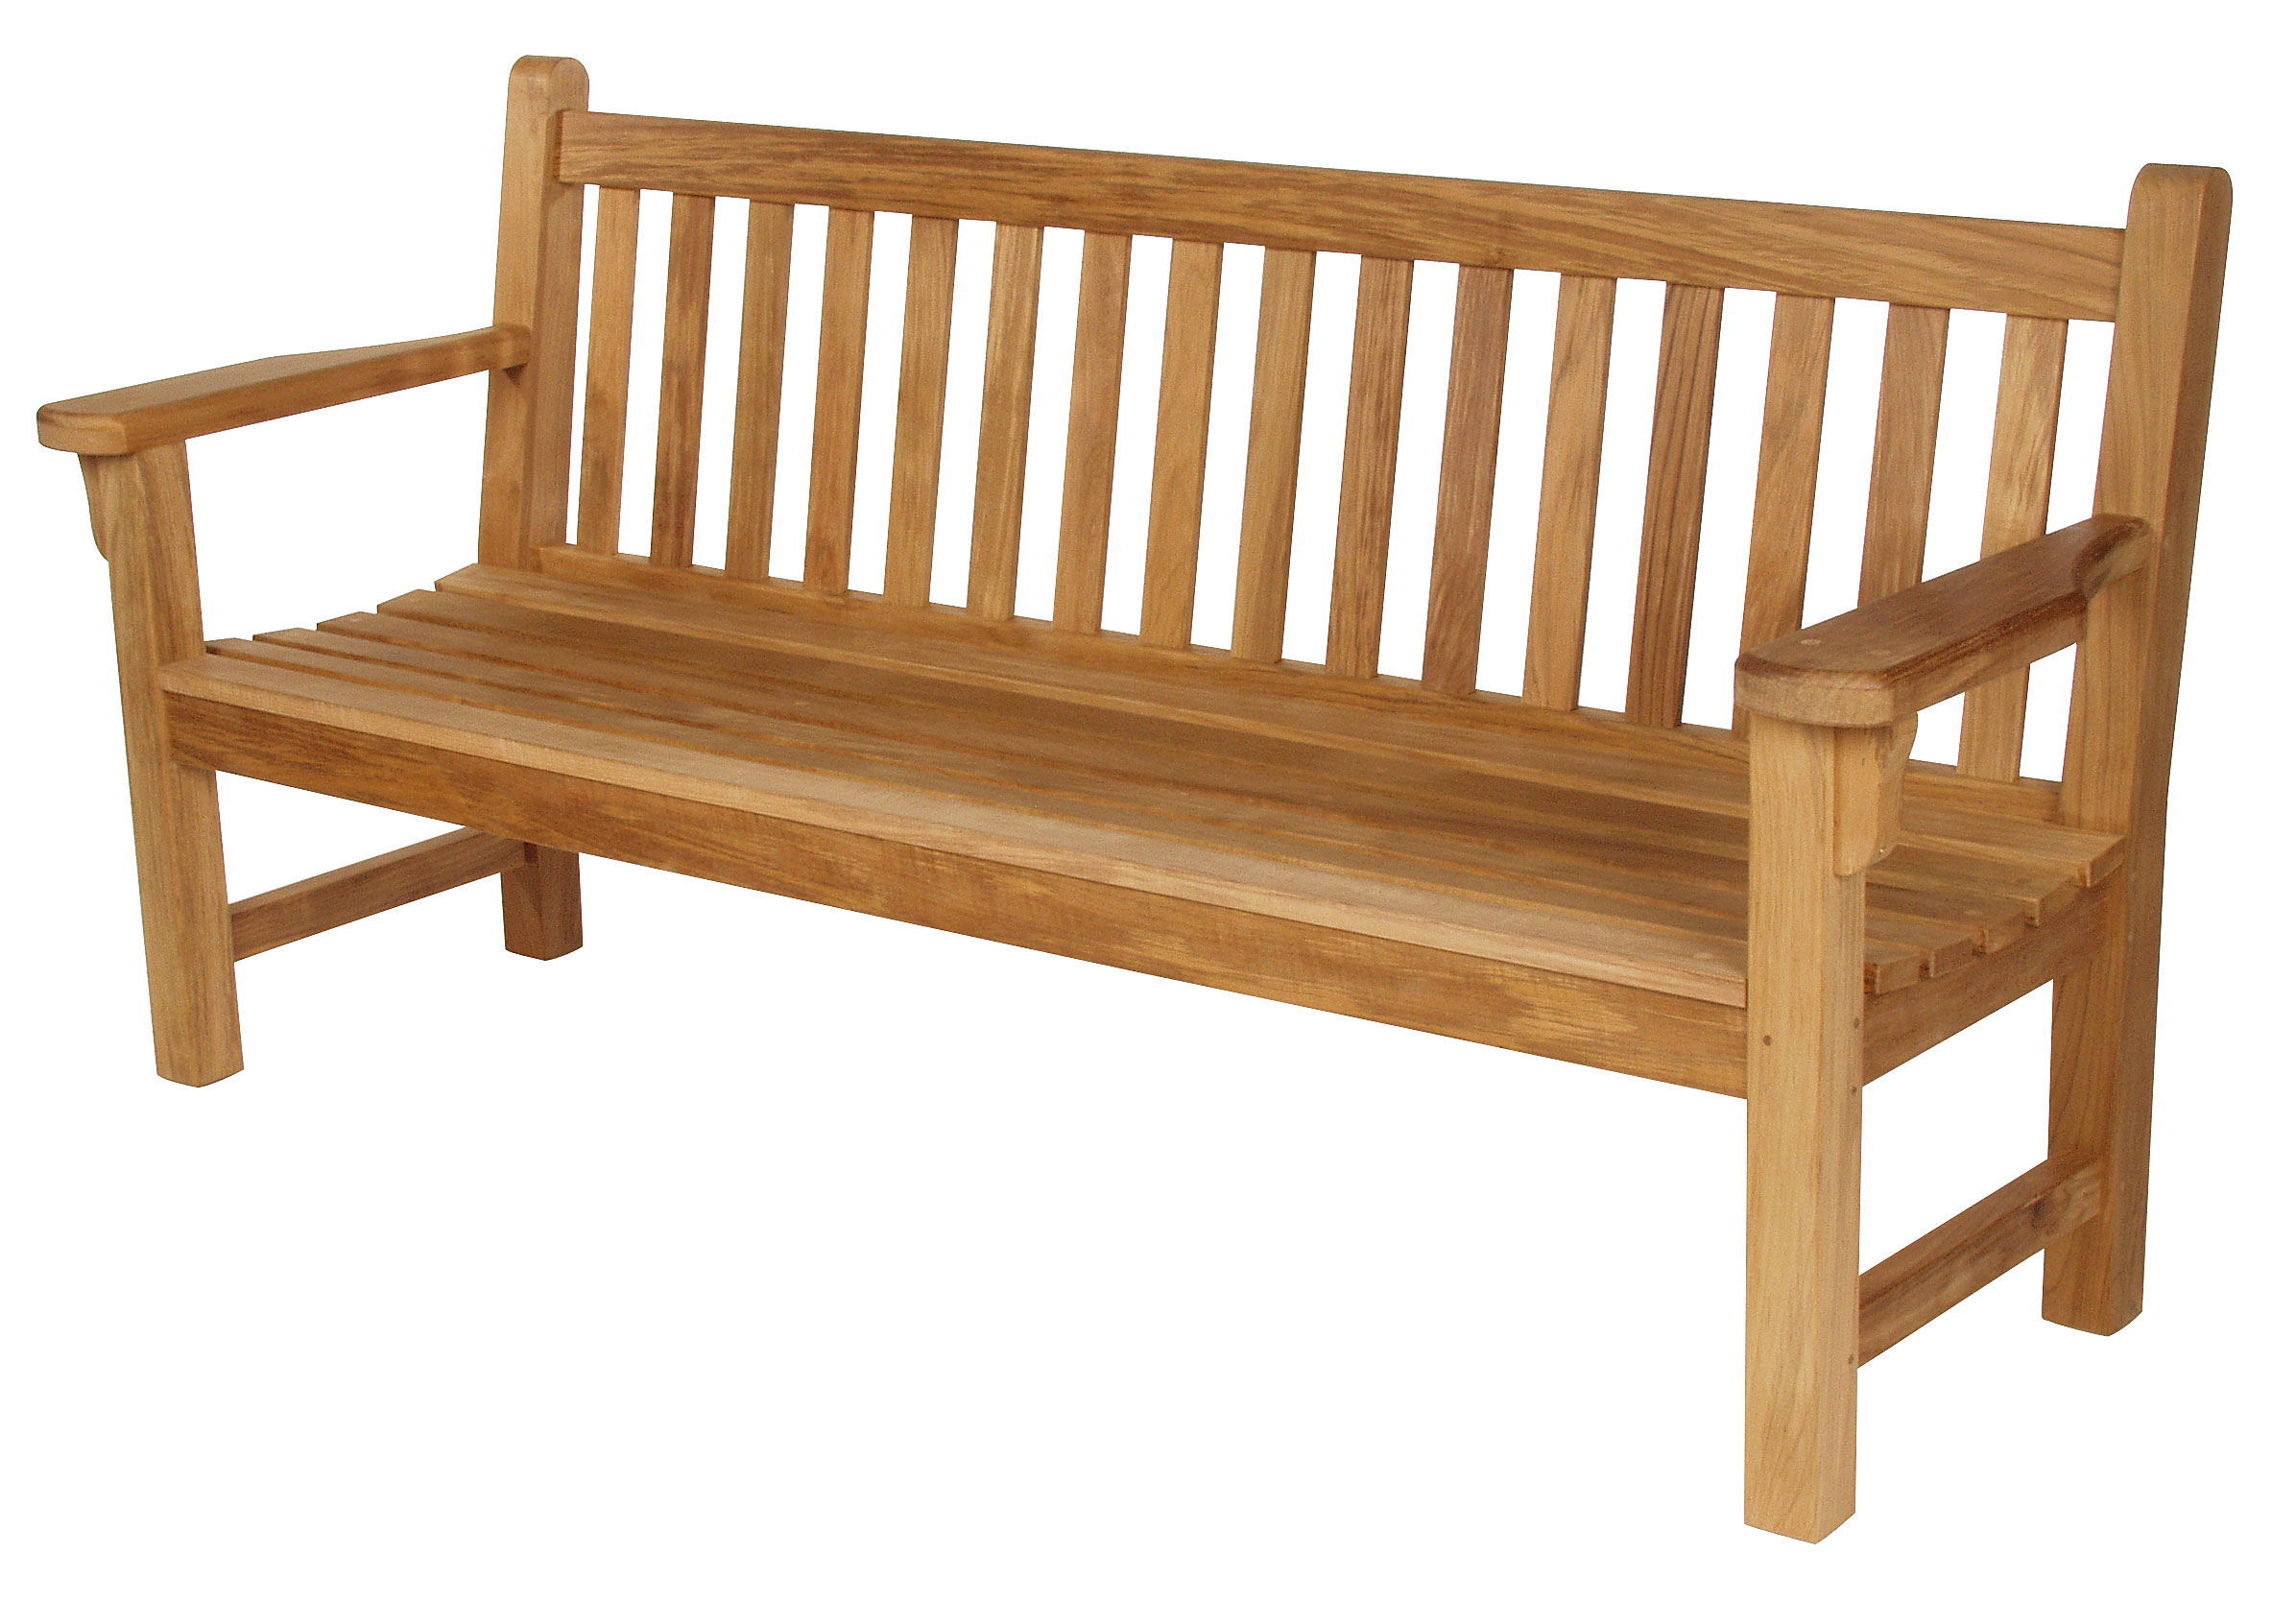 Barlow Tyrie London Garden Bench 180cm (Excluding Cushion)